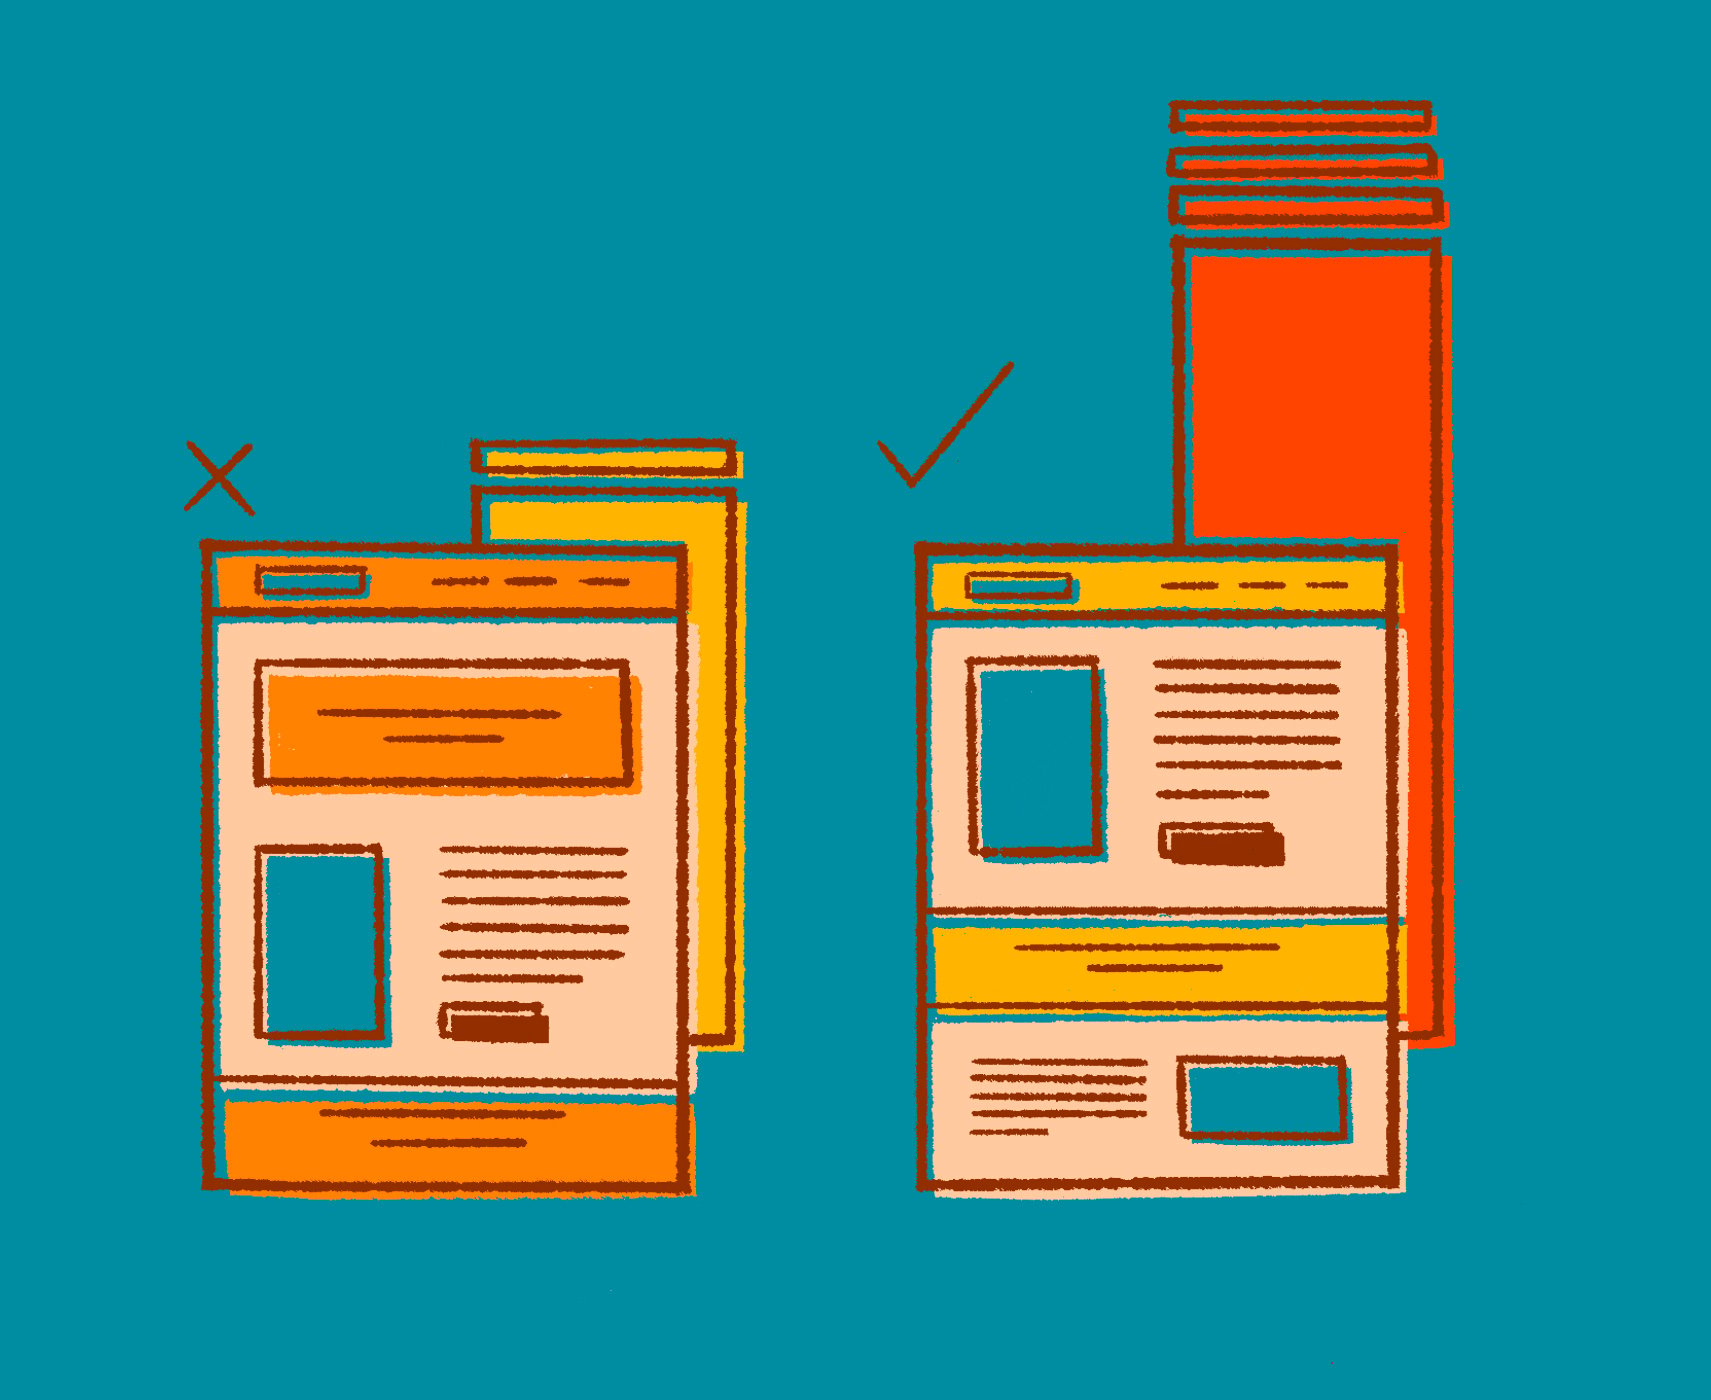 illustration of two different web pages, one with a checkmark and one with an x